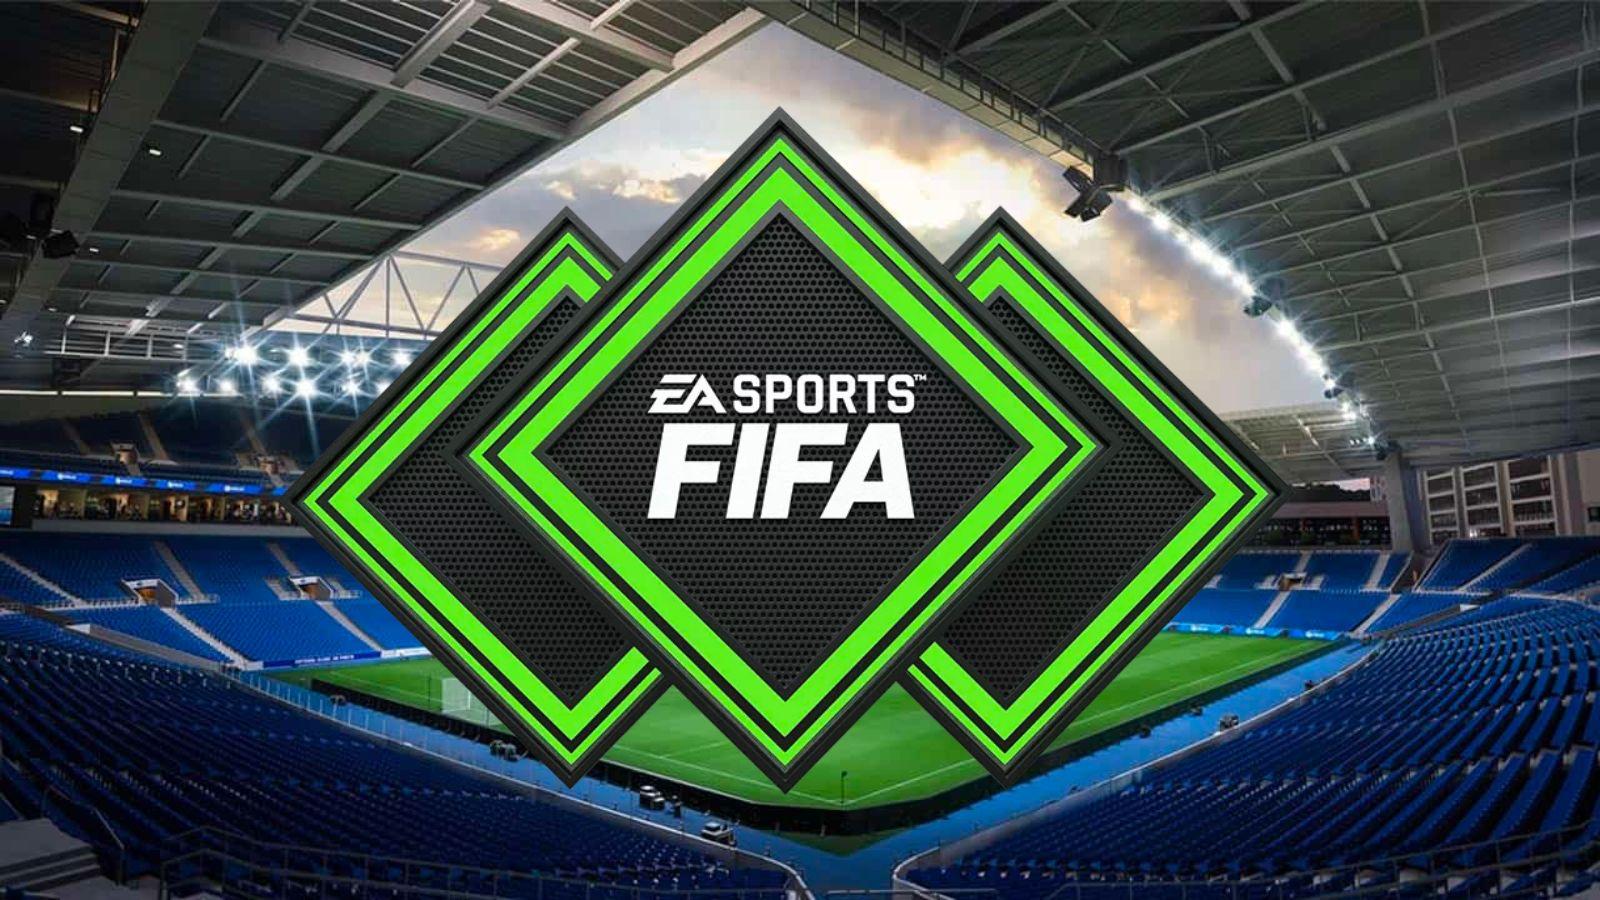 FIFA 23 Ultimate Team 2800 Point Pack - PC EA app